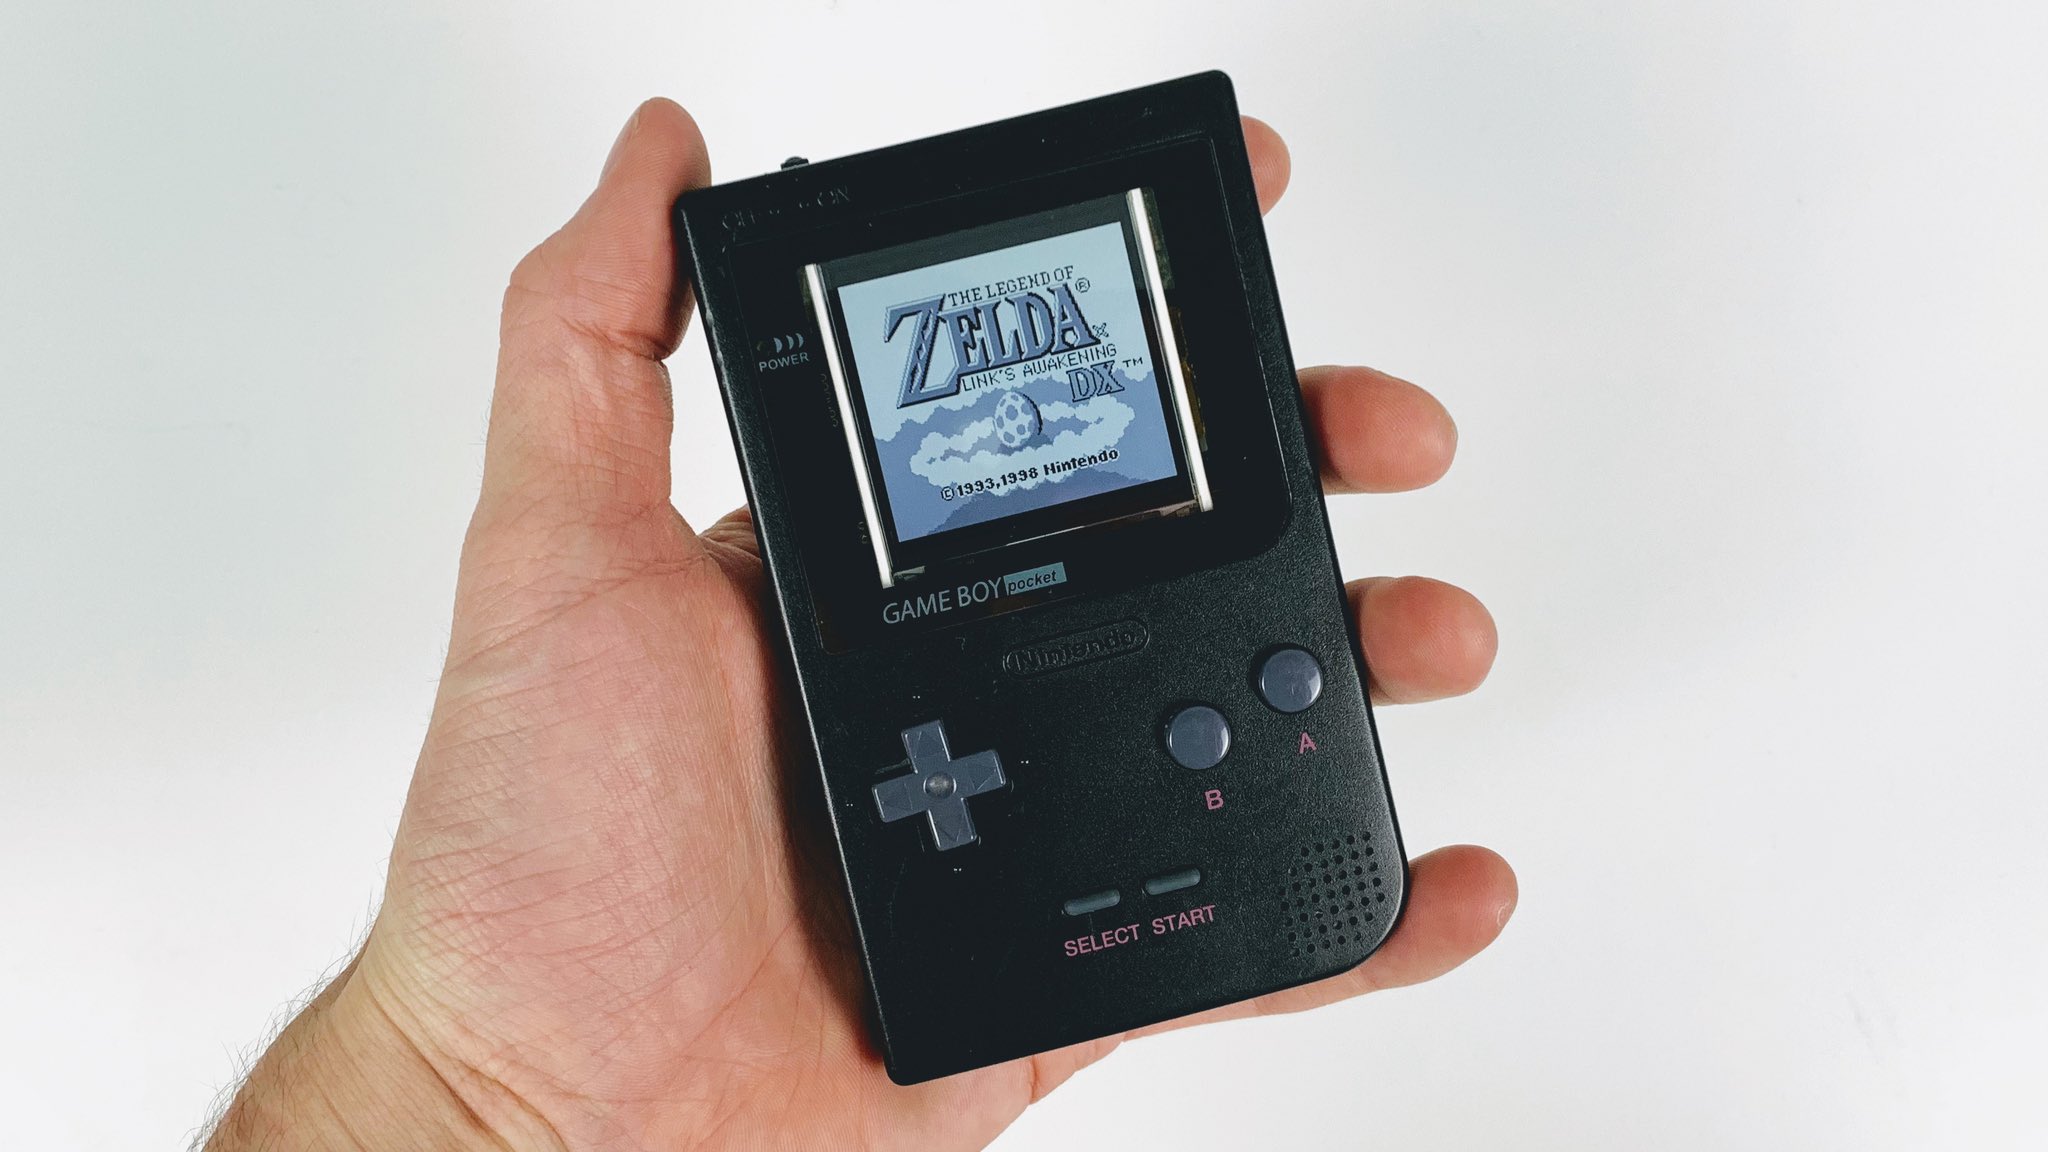 Embankment Airfield At søge tilflugt The Retro Future on Twitter: "The GameBoy Pocket just got a modern LCD  screen in it! No need to backlight it any more. https://t.co/3uityTYLo1" / X